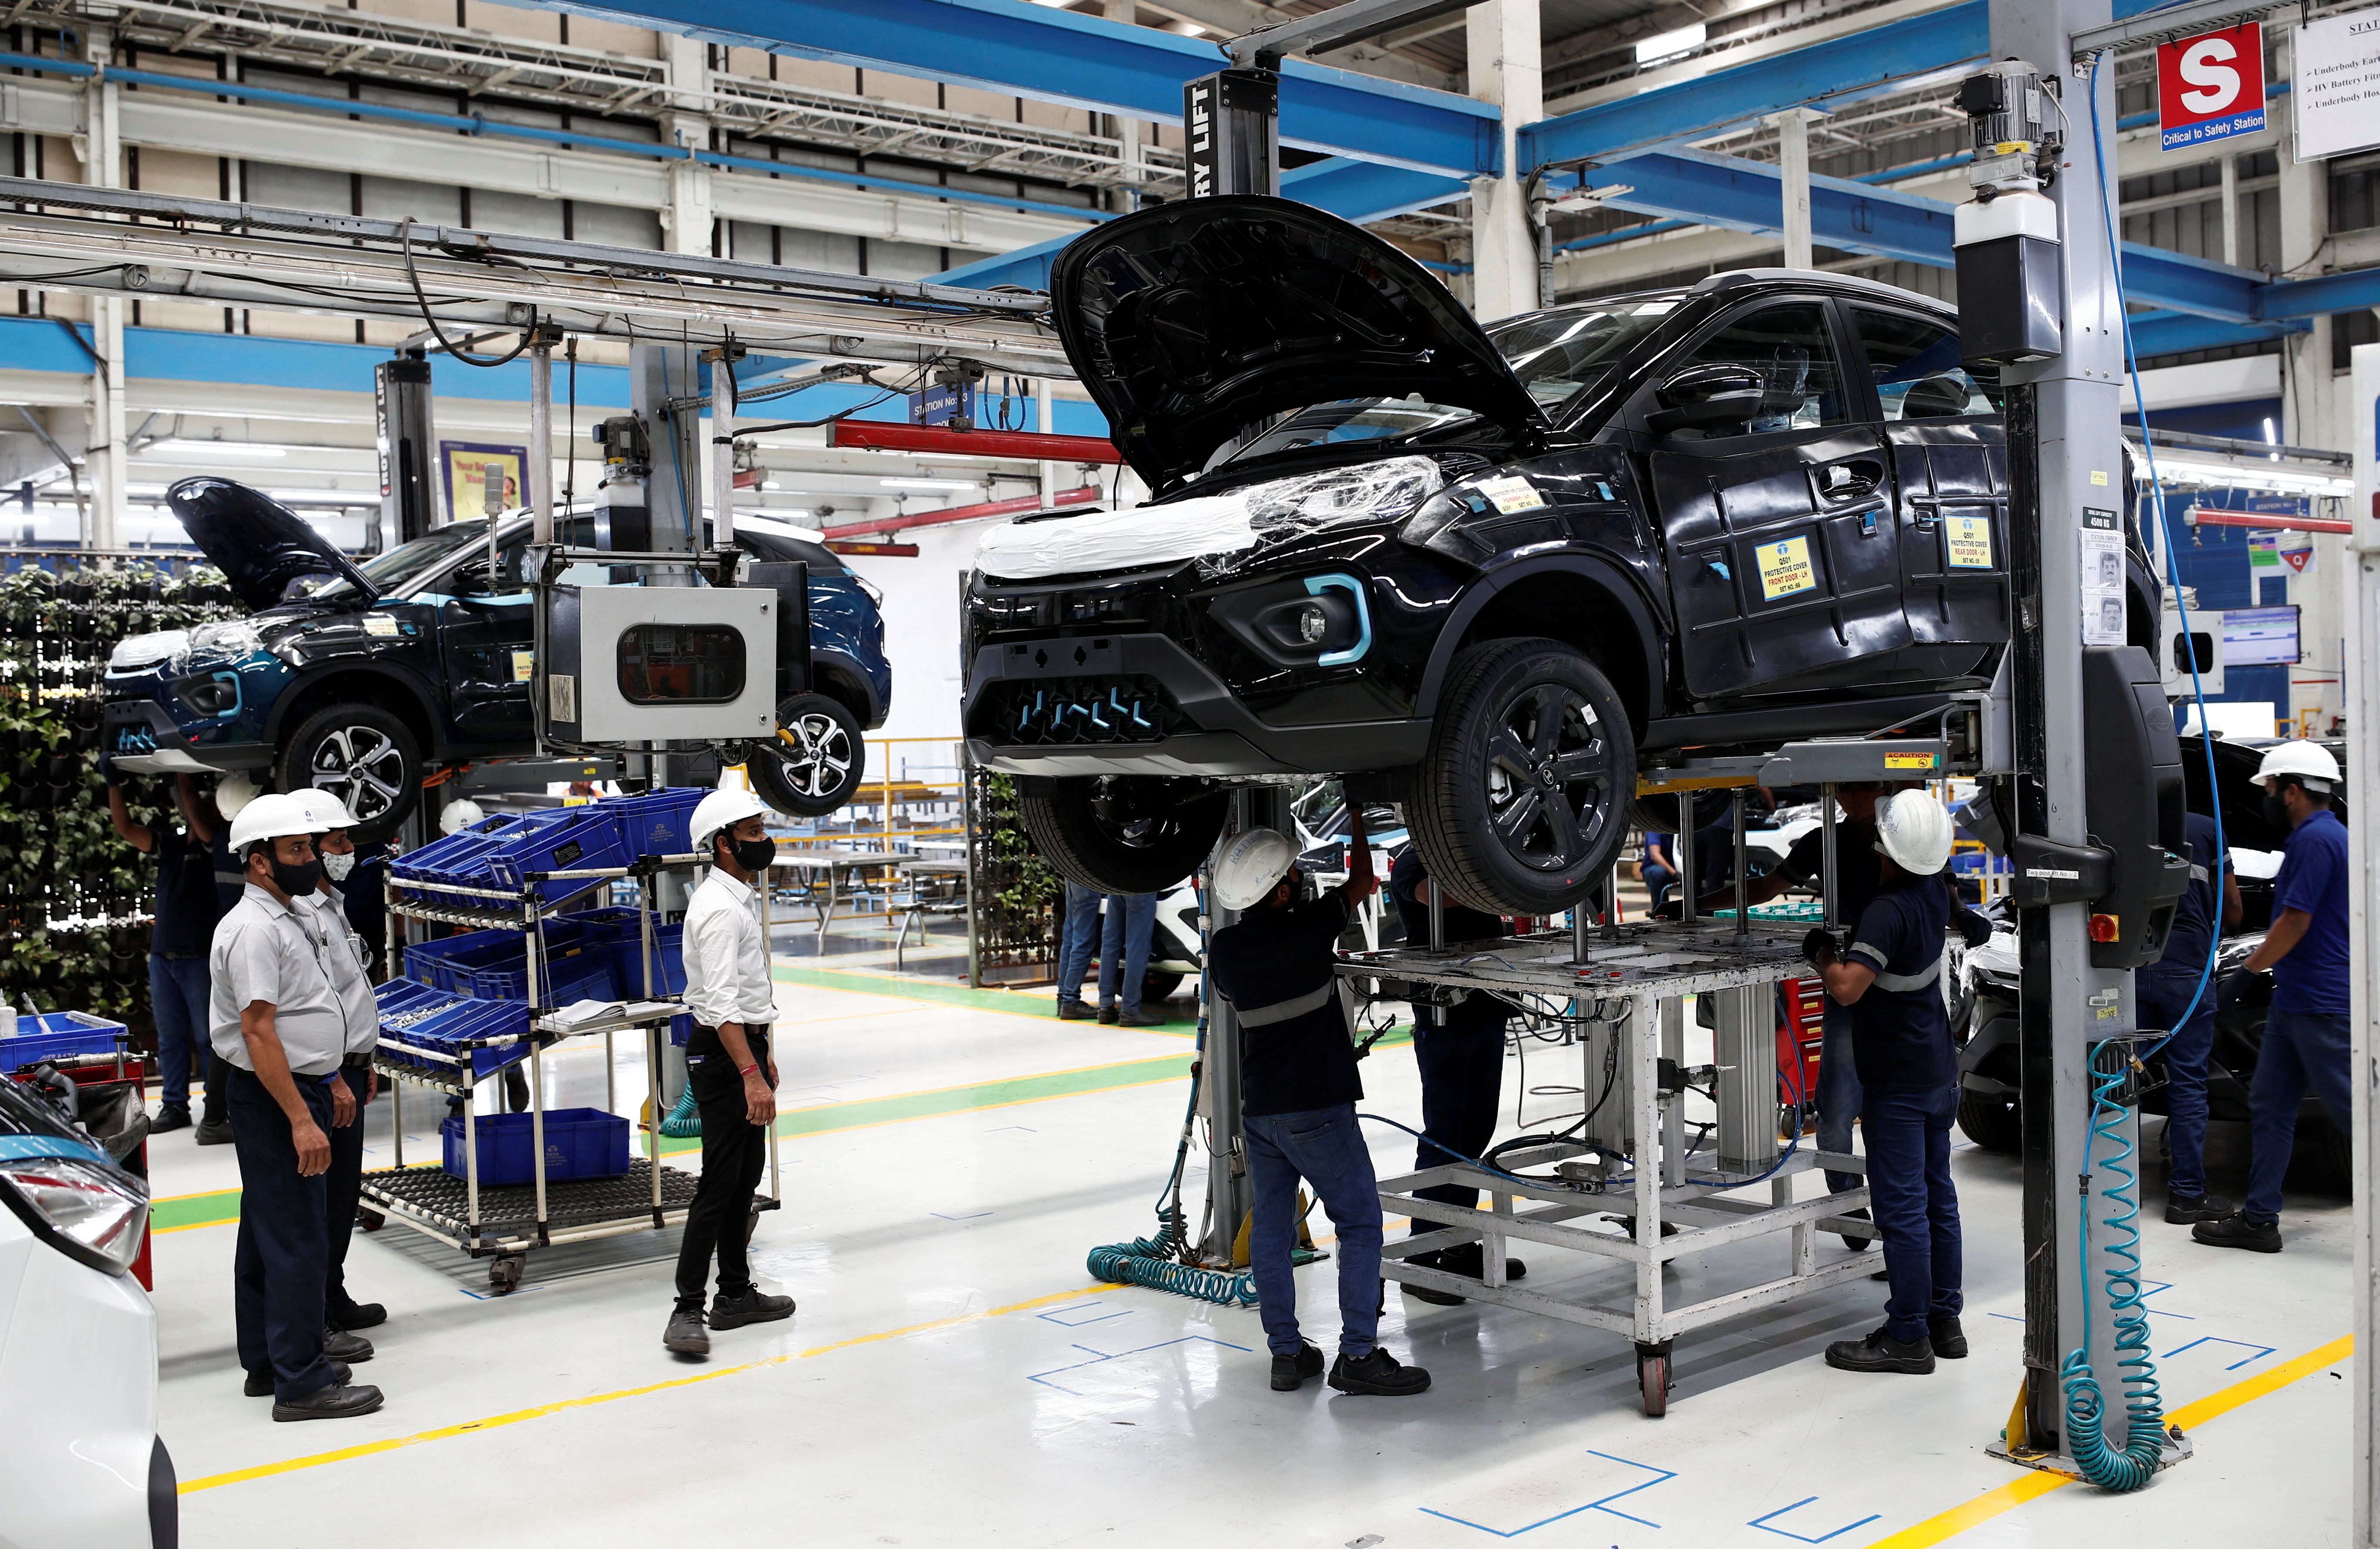 Workers inspect Tata Nexon electric sport utility vehicles (SUV) at a Tata Motors plant in Pune